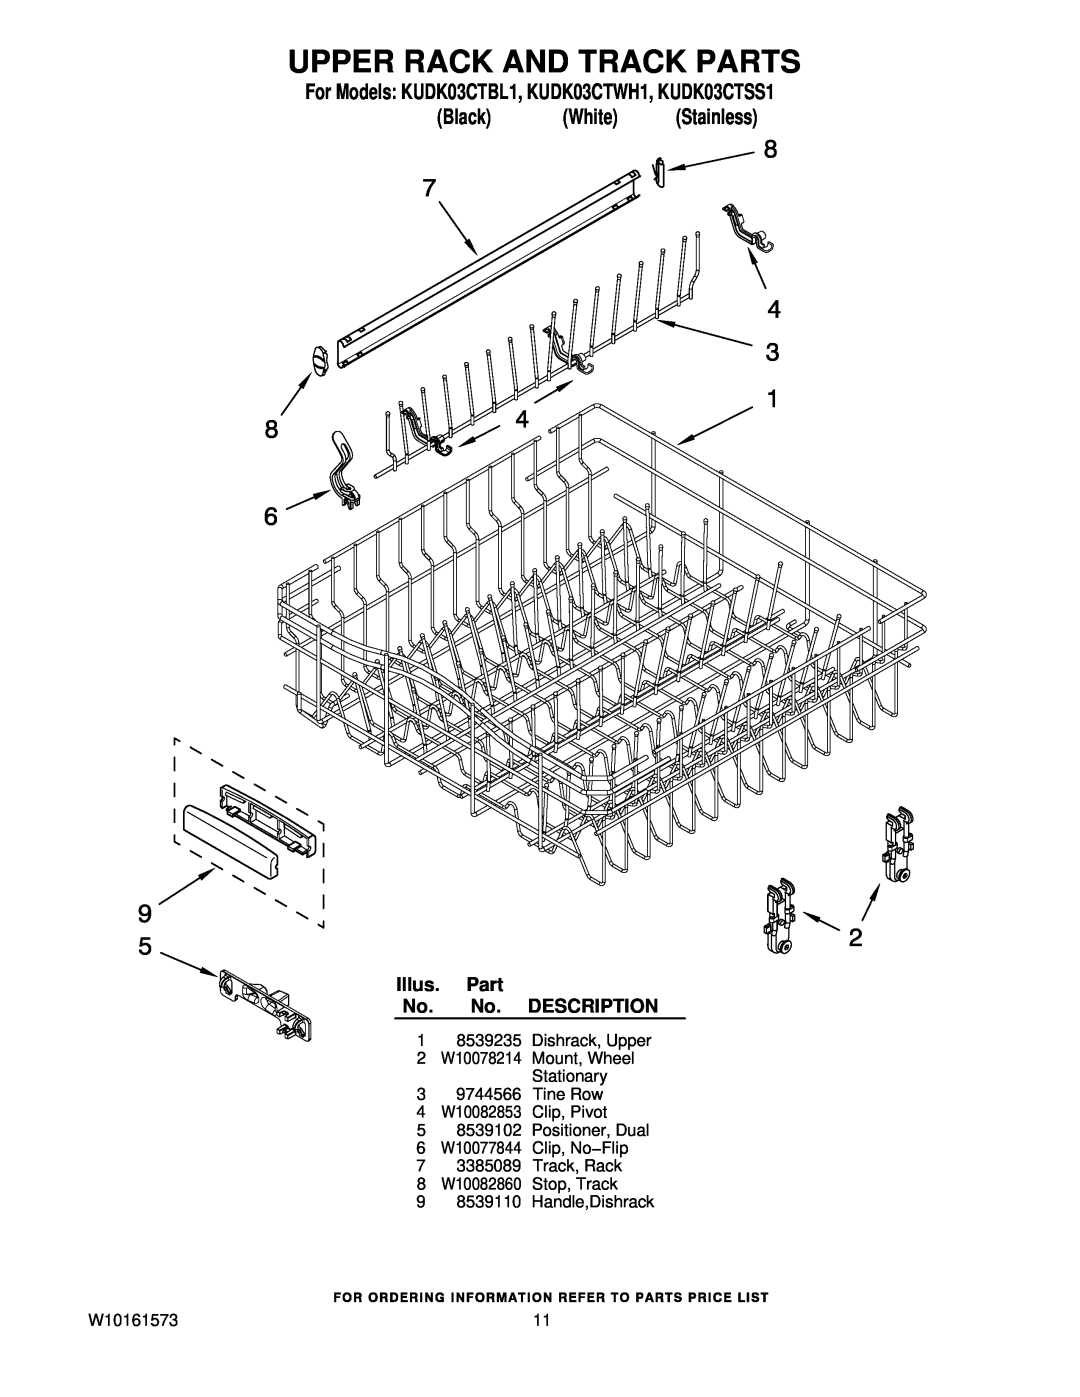 KitchenAid manual Upper Rack And Track Parts, For Models KUDK03CTBL1, KUDK03CTWH1, KUDK03CTSS1, Black White Stainless 